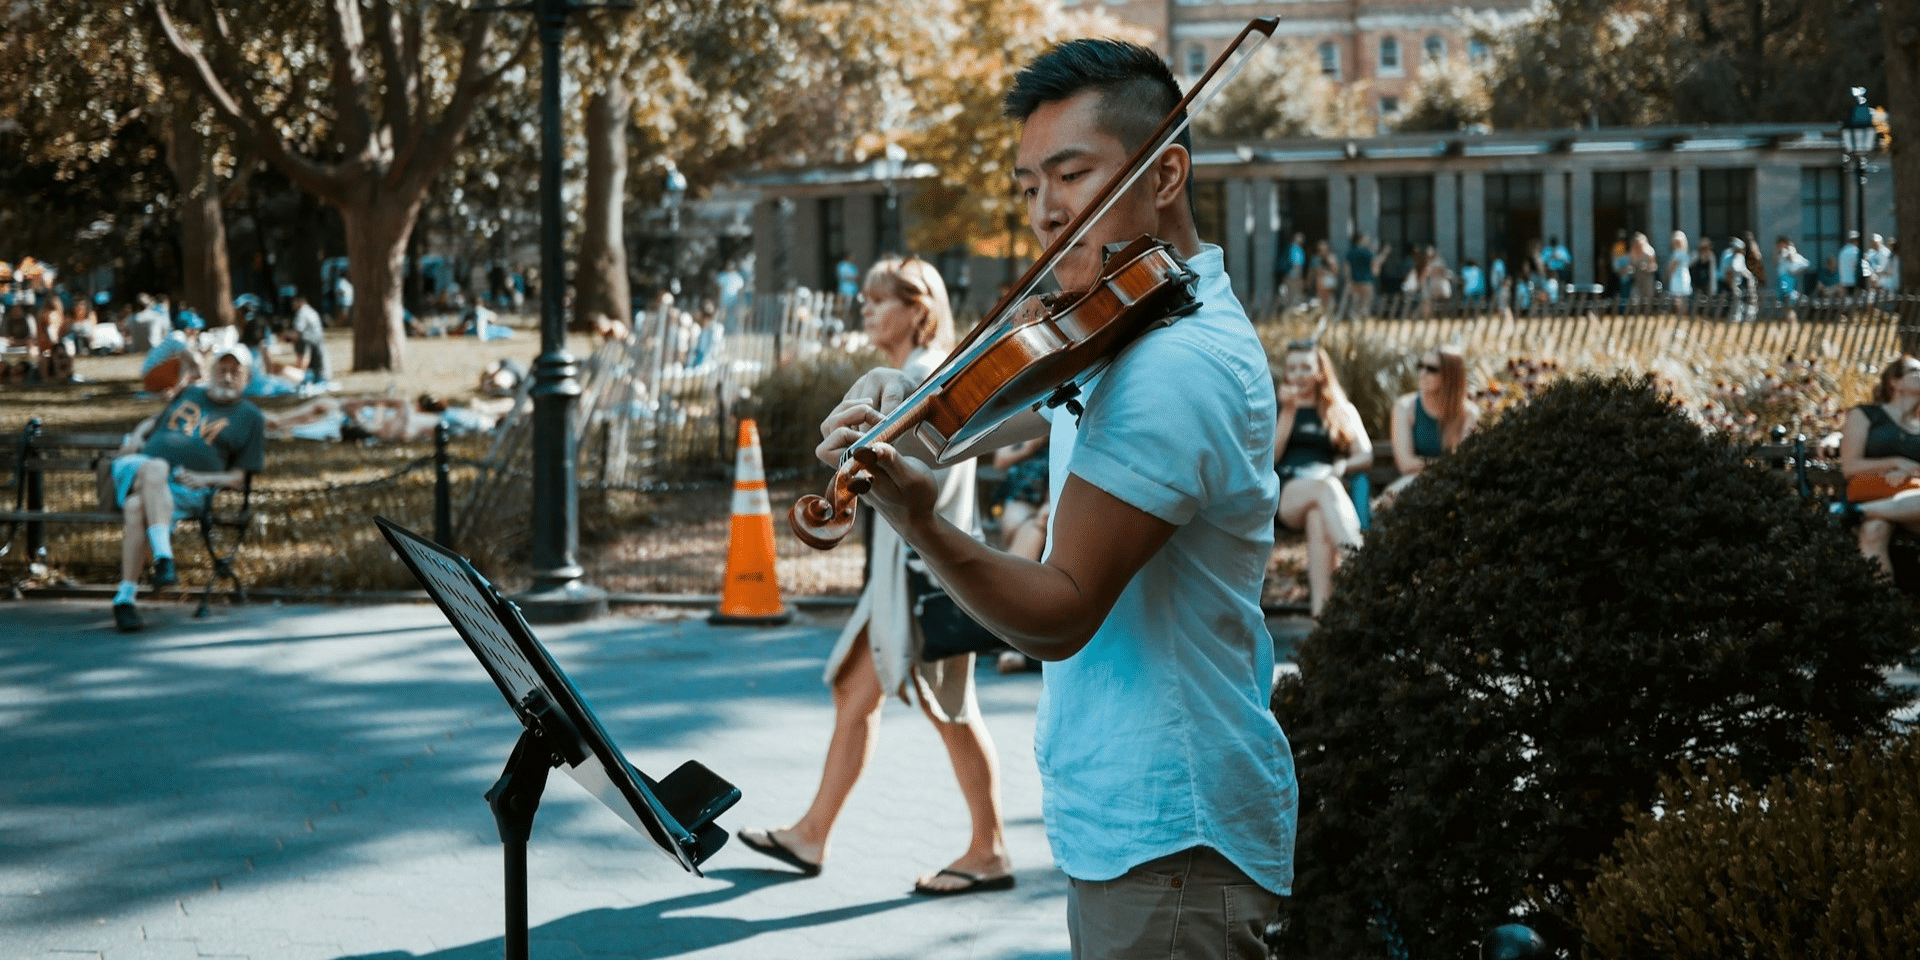 The Resonance of Street Musicians: the Cultural Impact